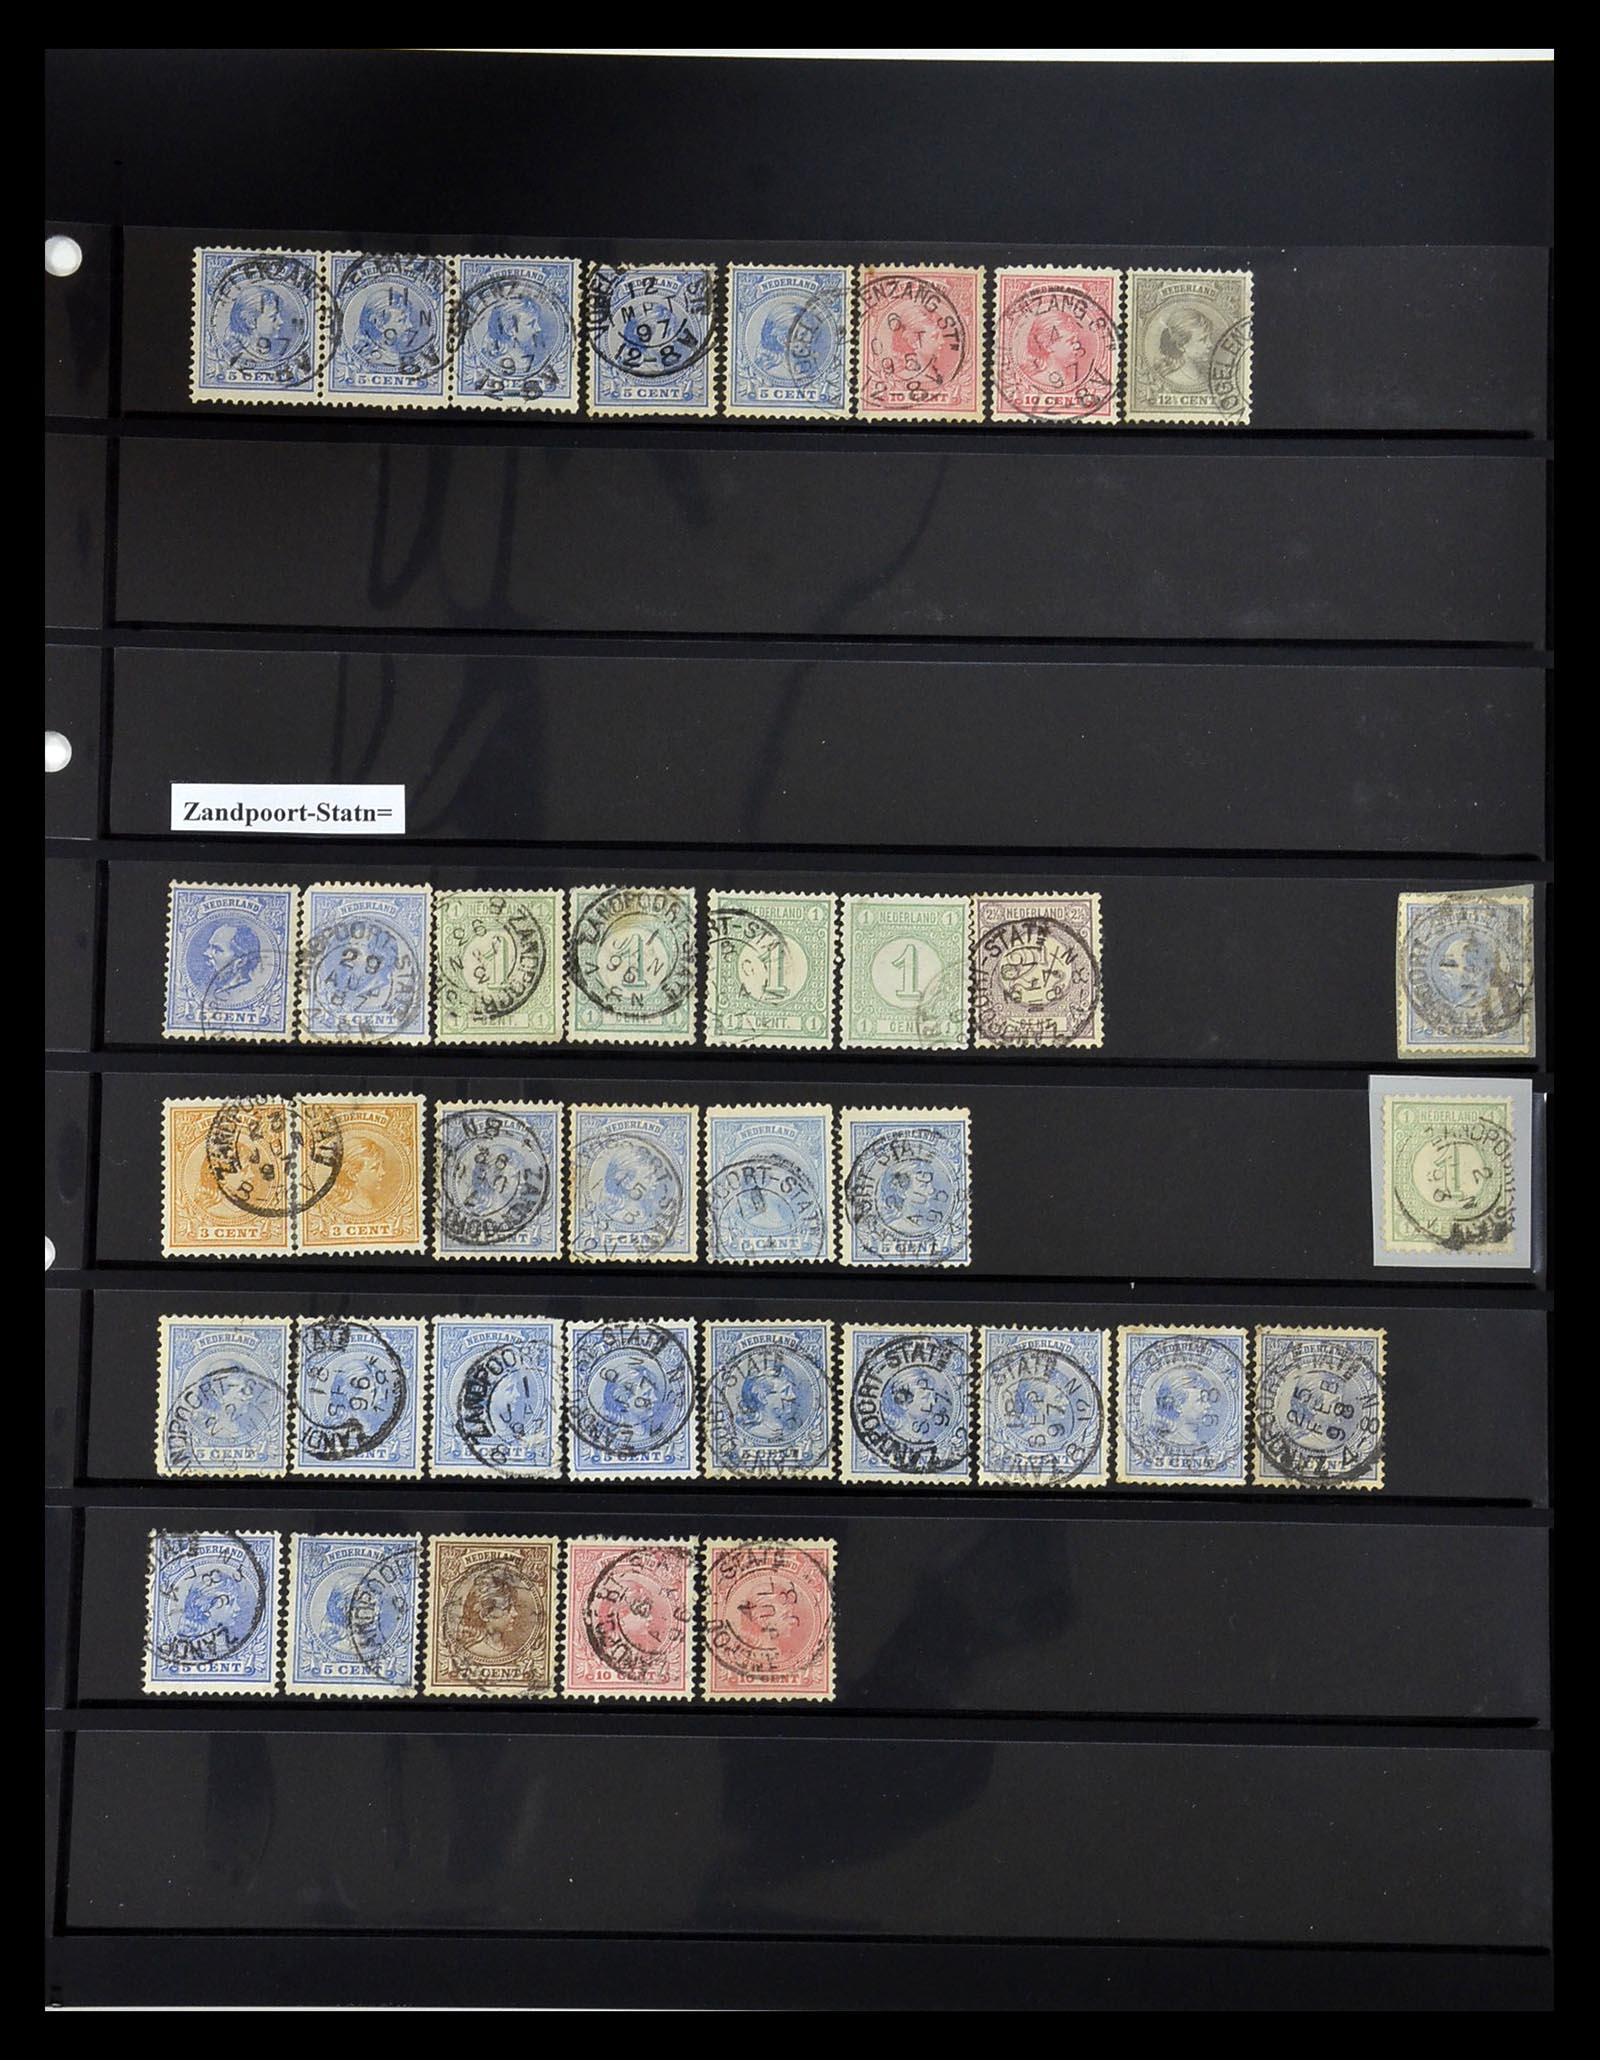 34889 027 - Stamp Collection 34889 Netherlands small round station cancels.